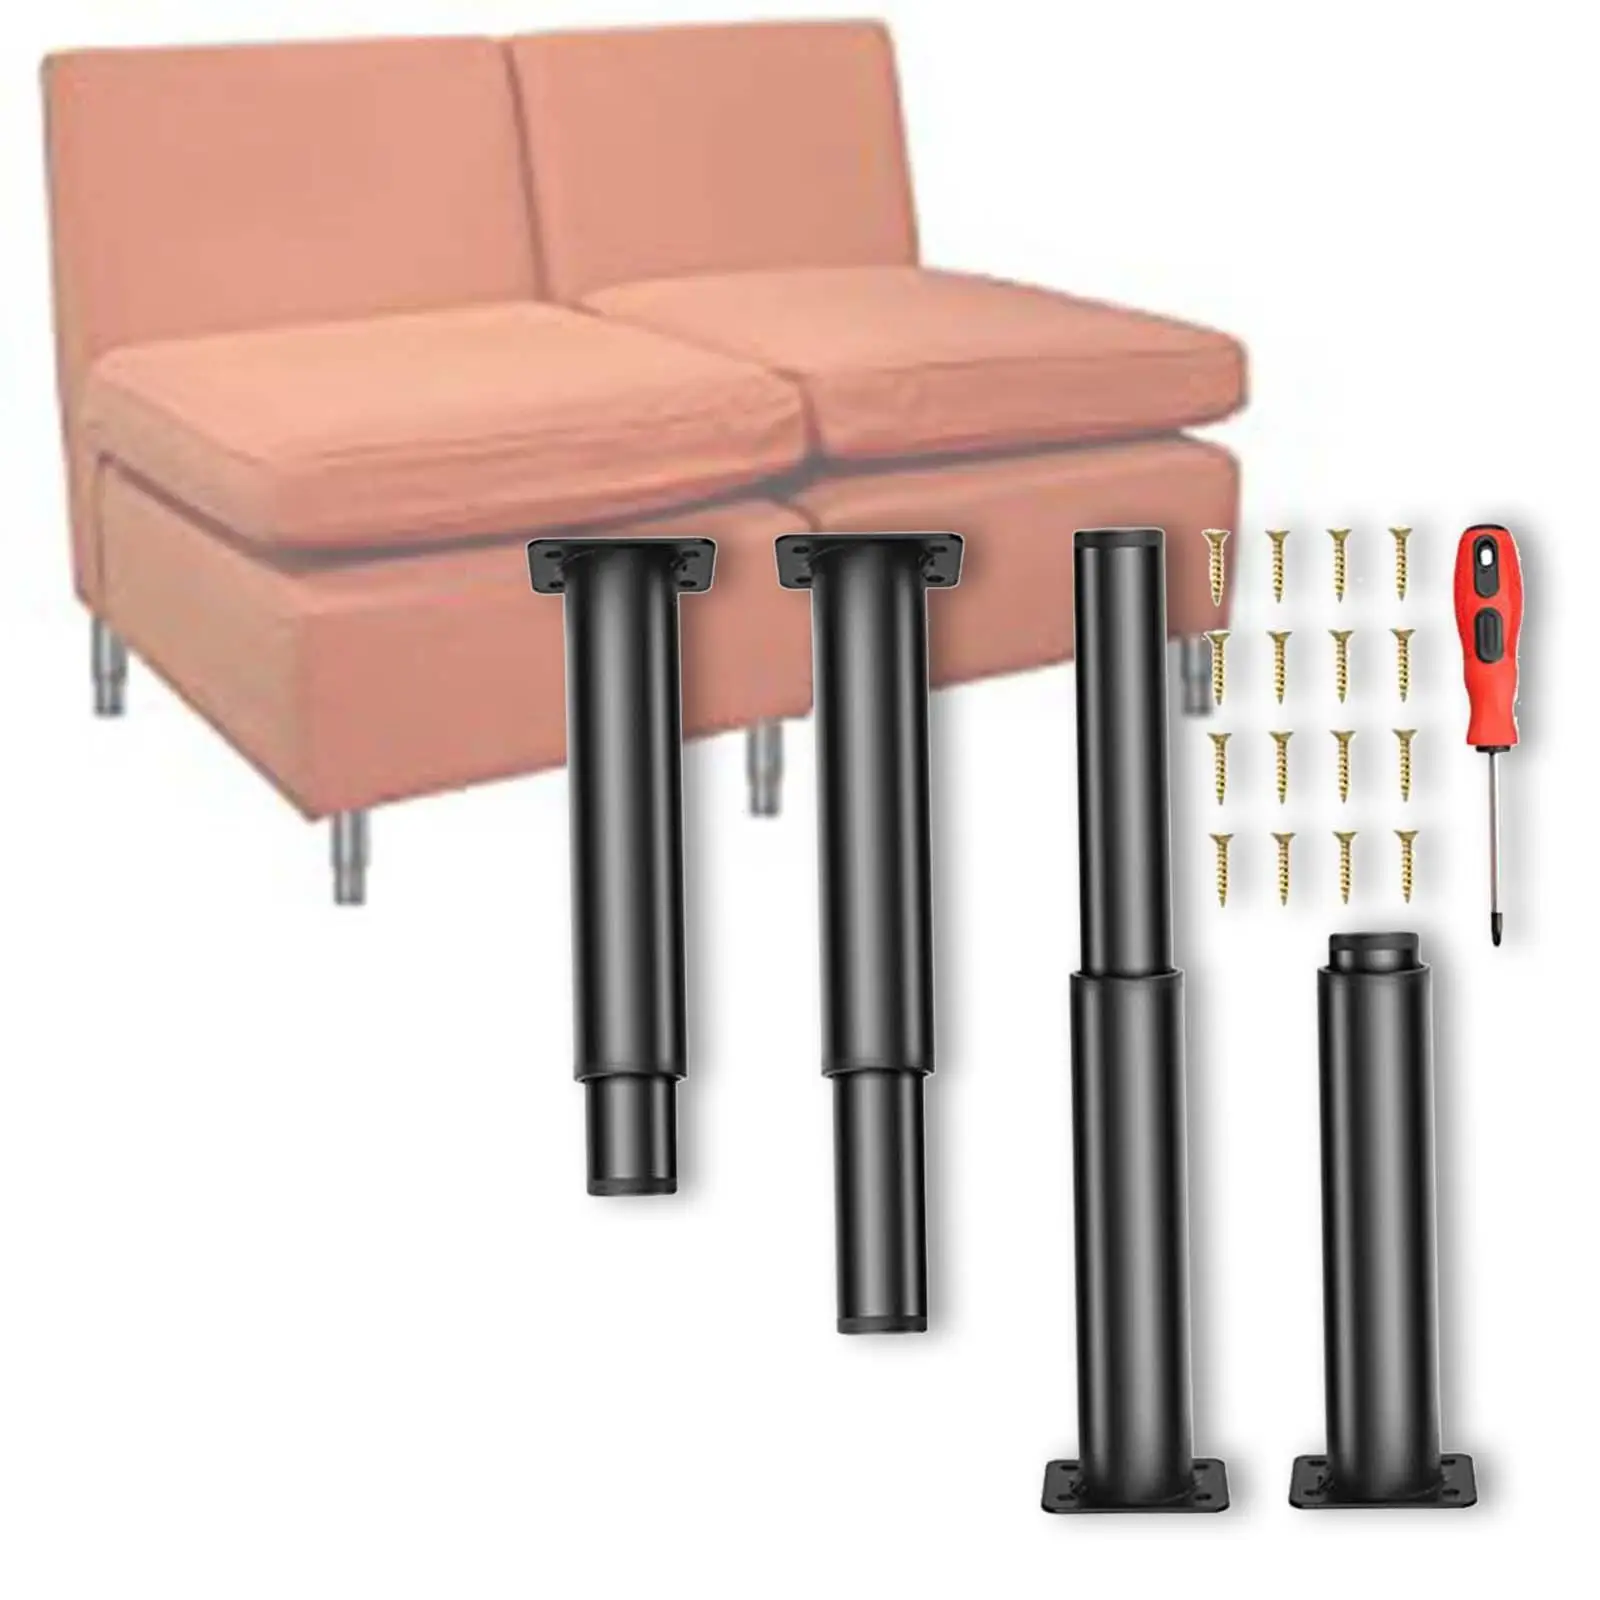 4 Pieces Metal Adjustable Leg for Table Black Adjustable Cabinet Foot Legs for Dressing Table Desks Coffee Table Furniture Sofa